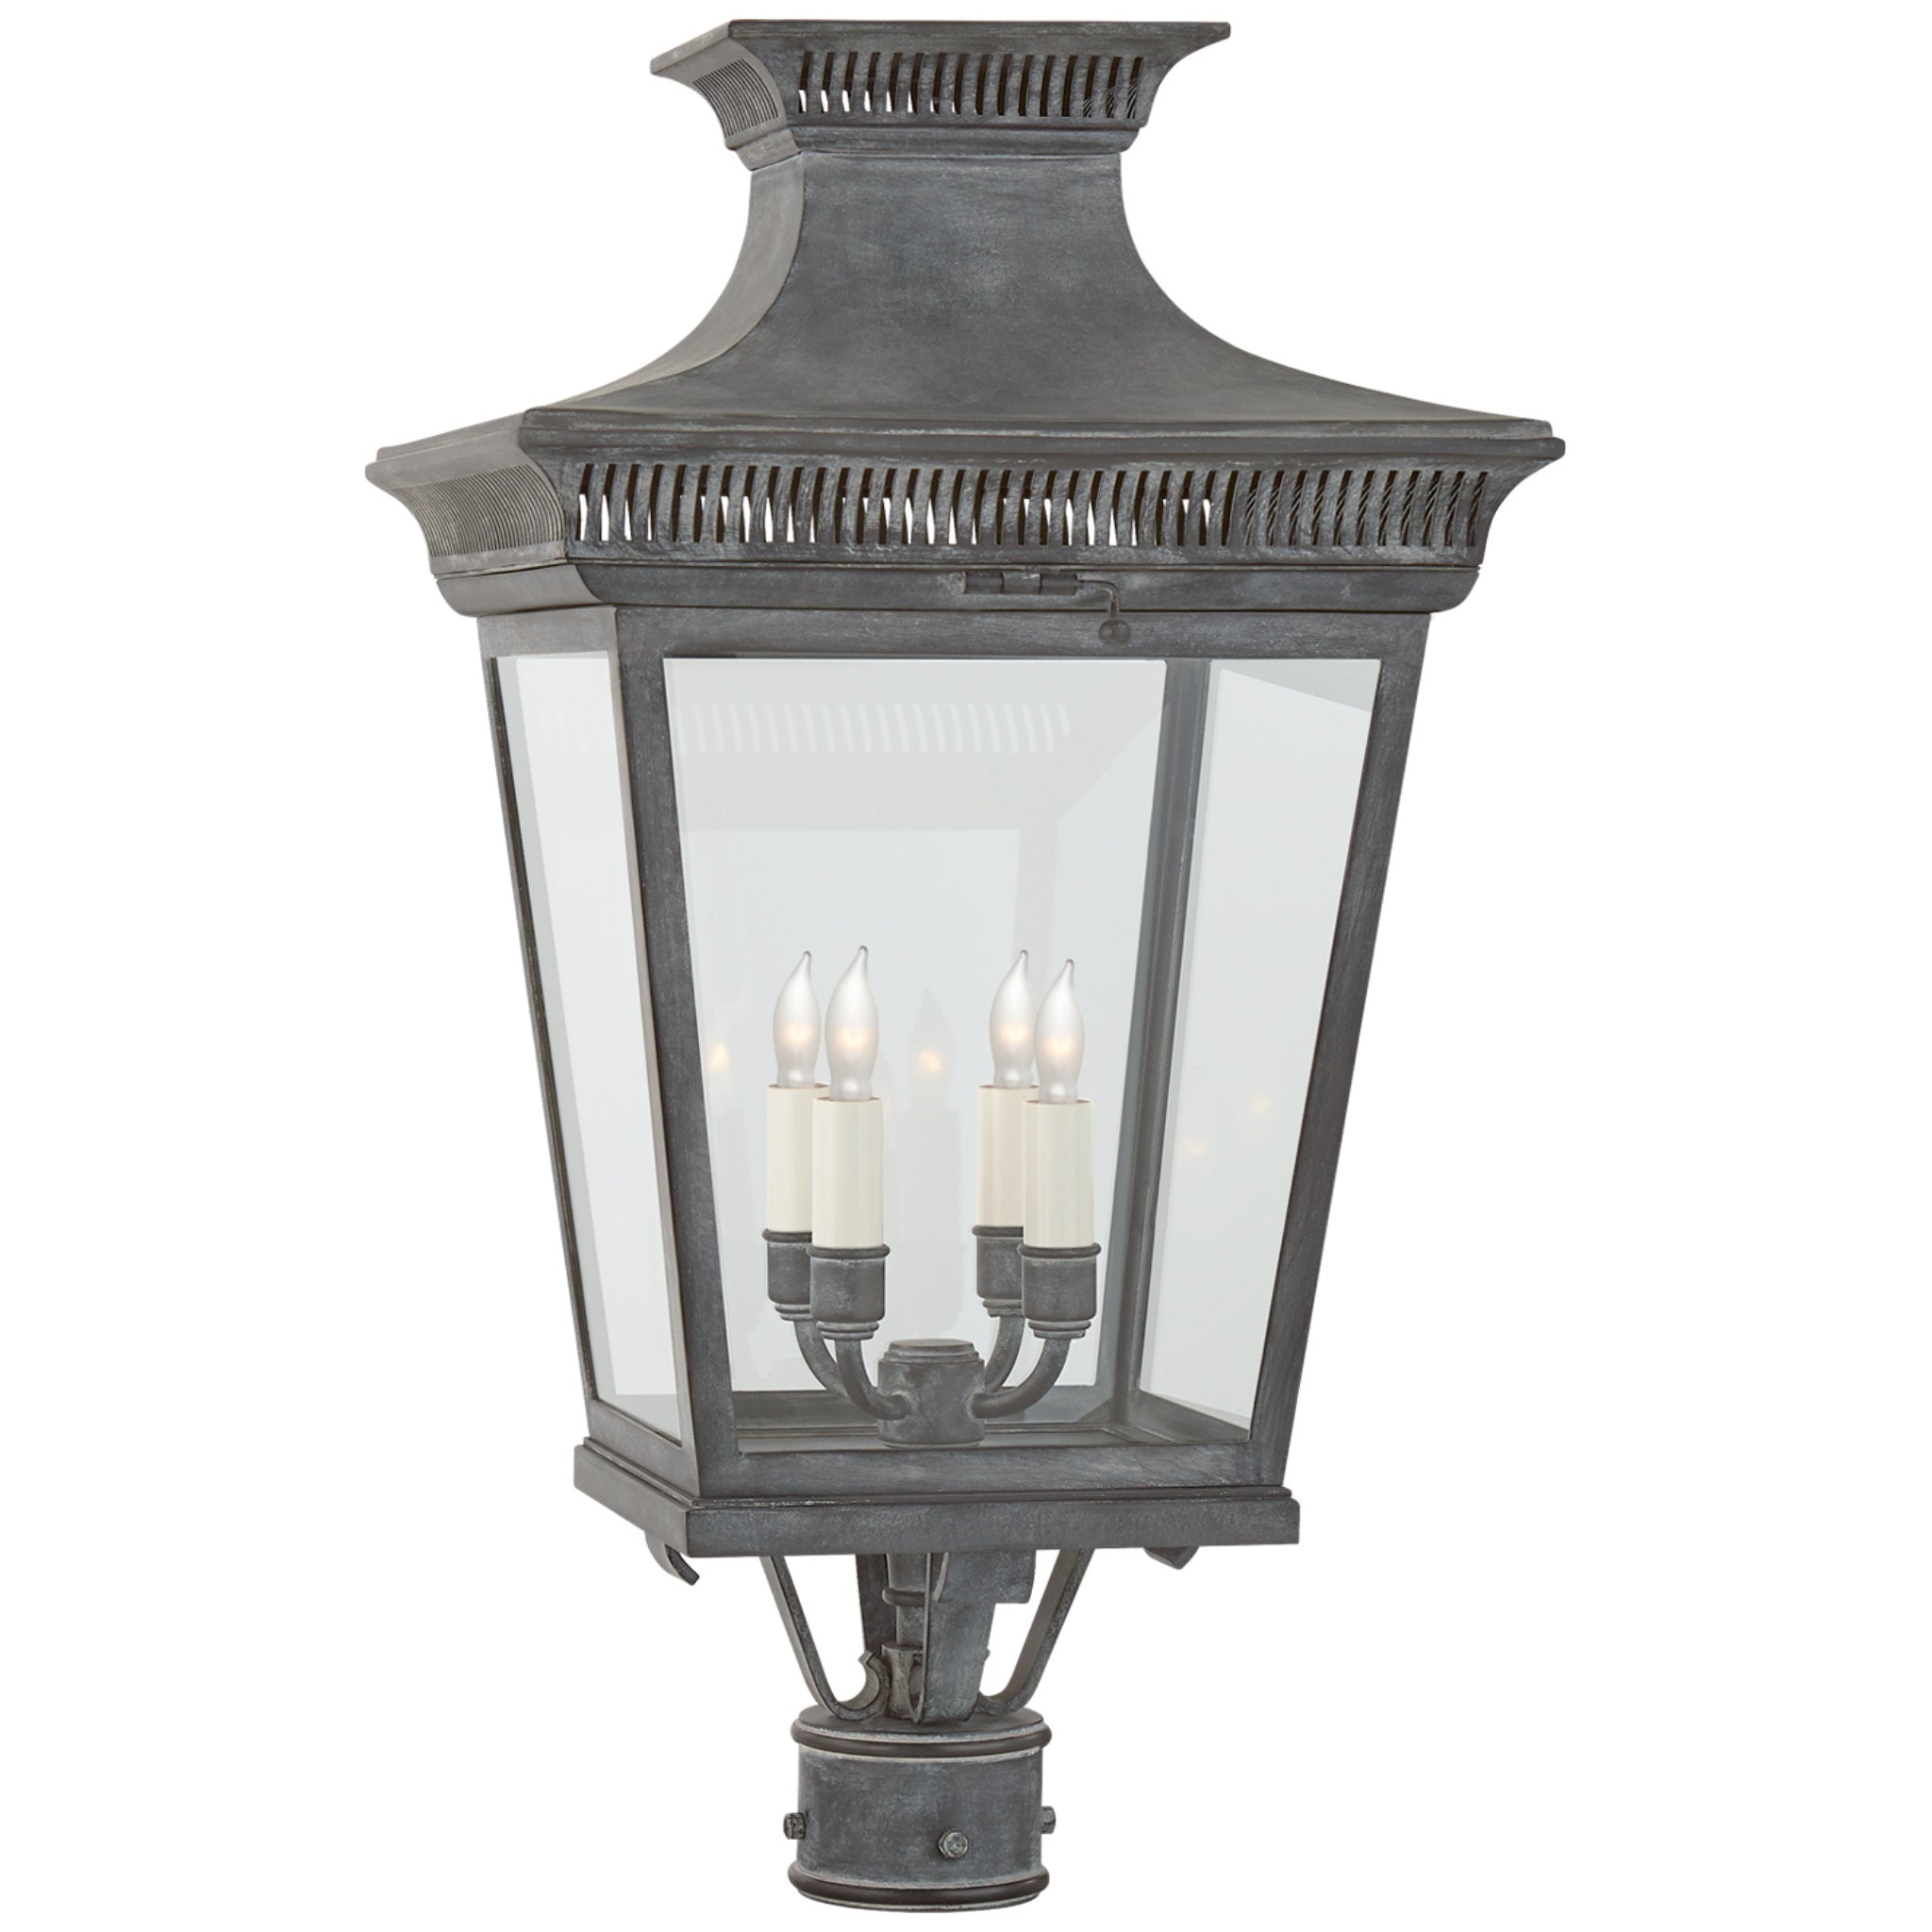 Chapman & Myers Elsinore Medium Post Lantern in Weathered Zinc with Clear Glass